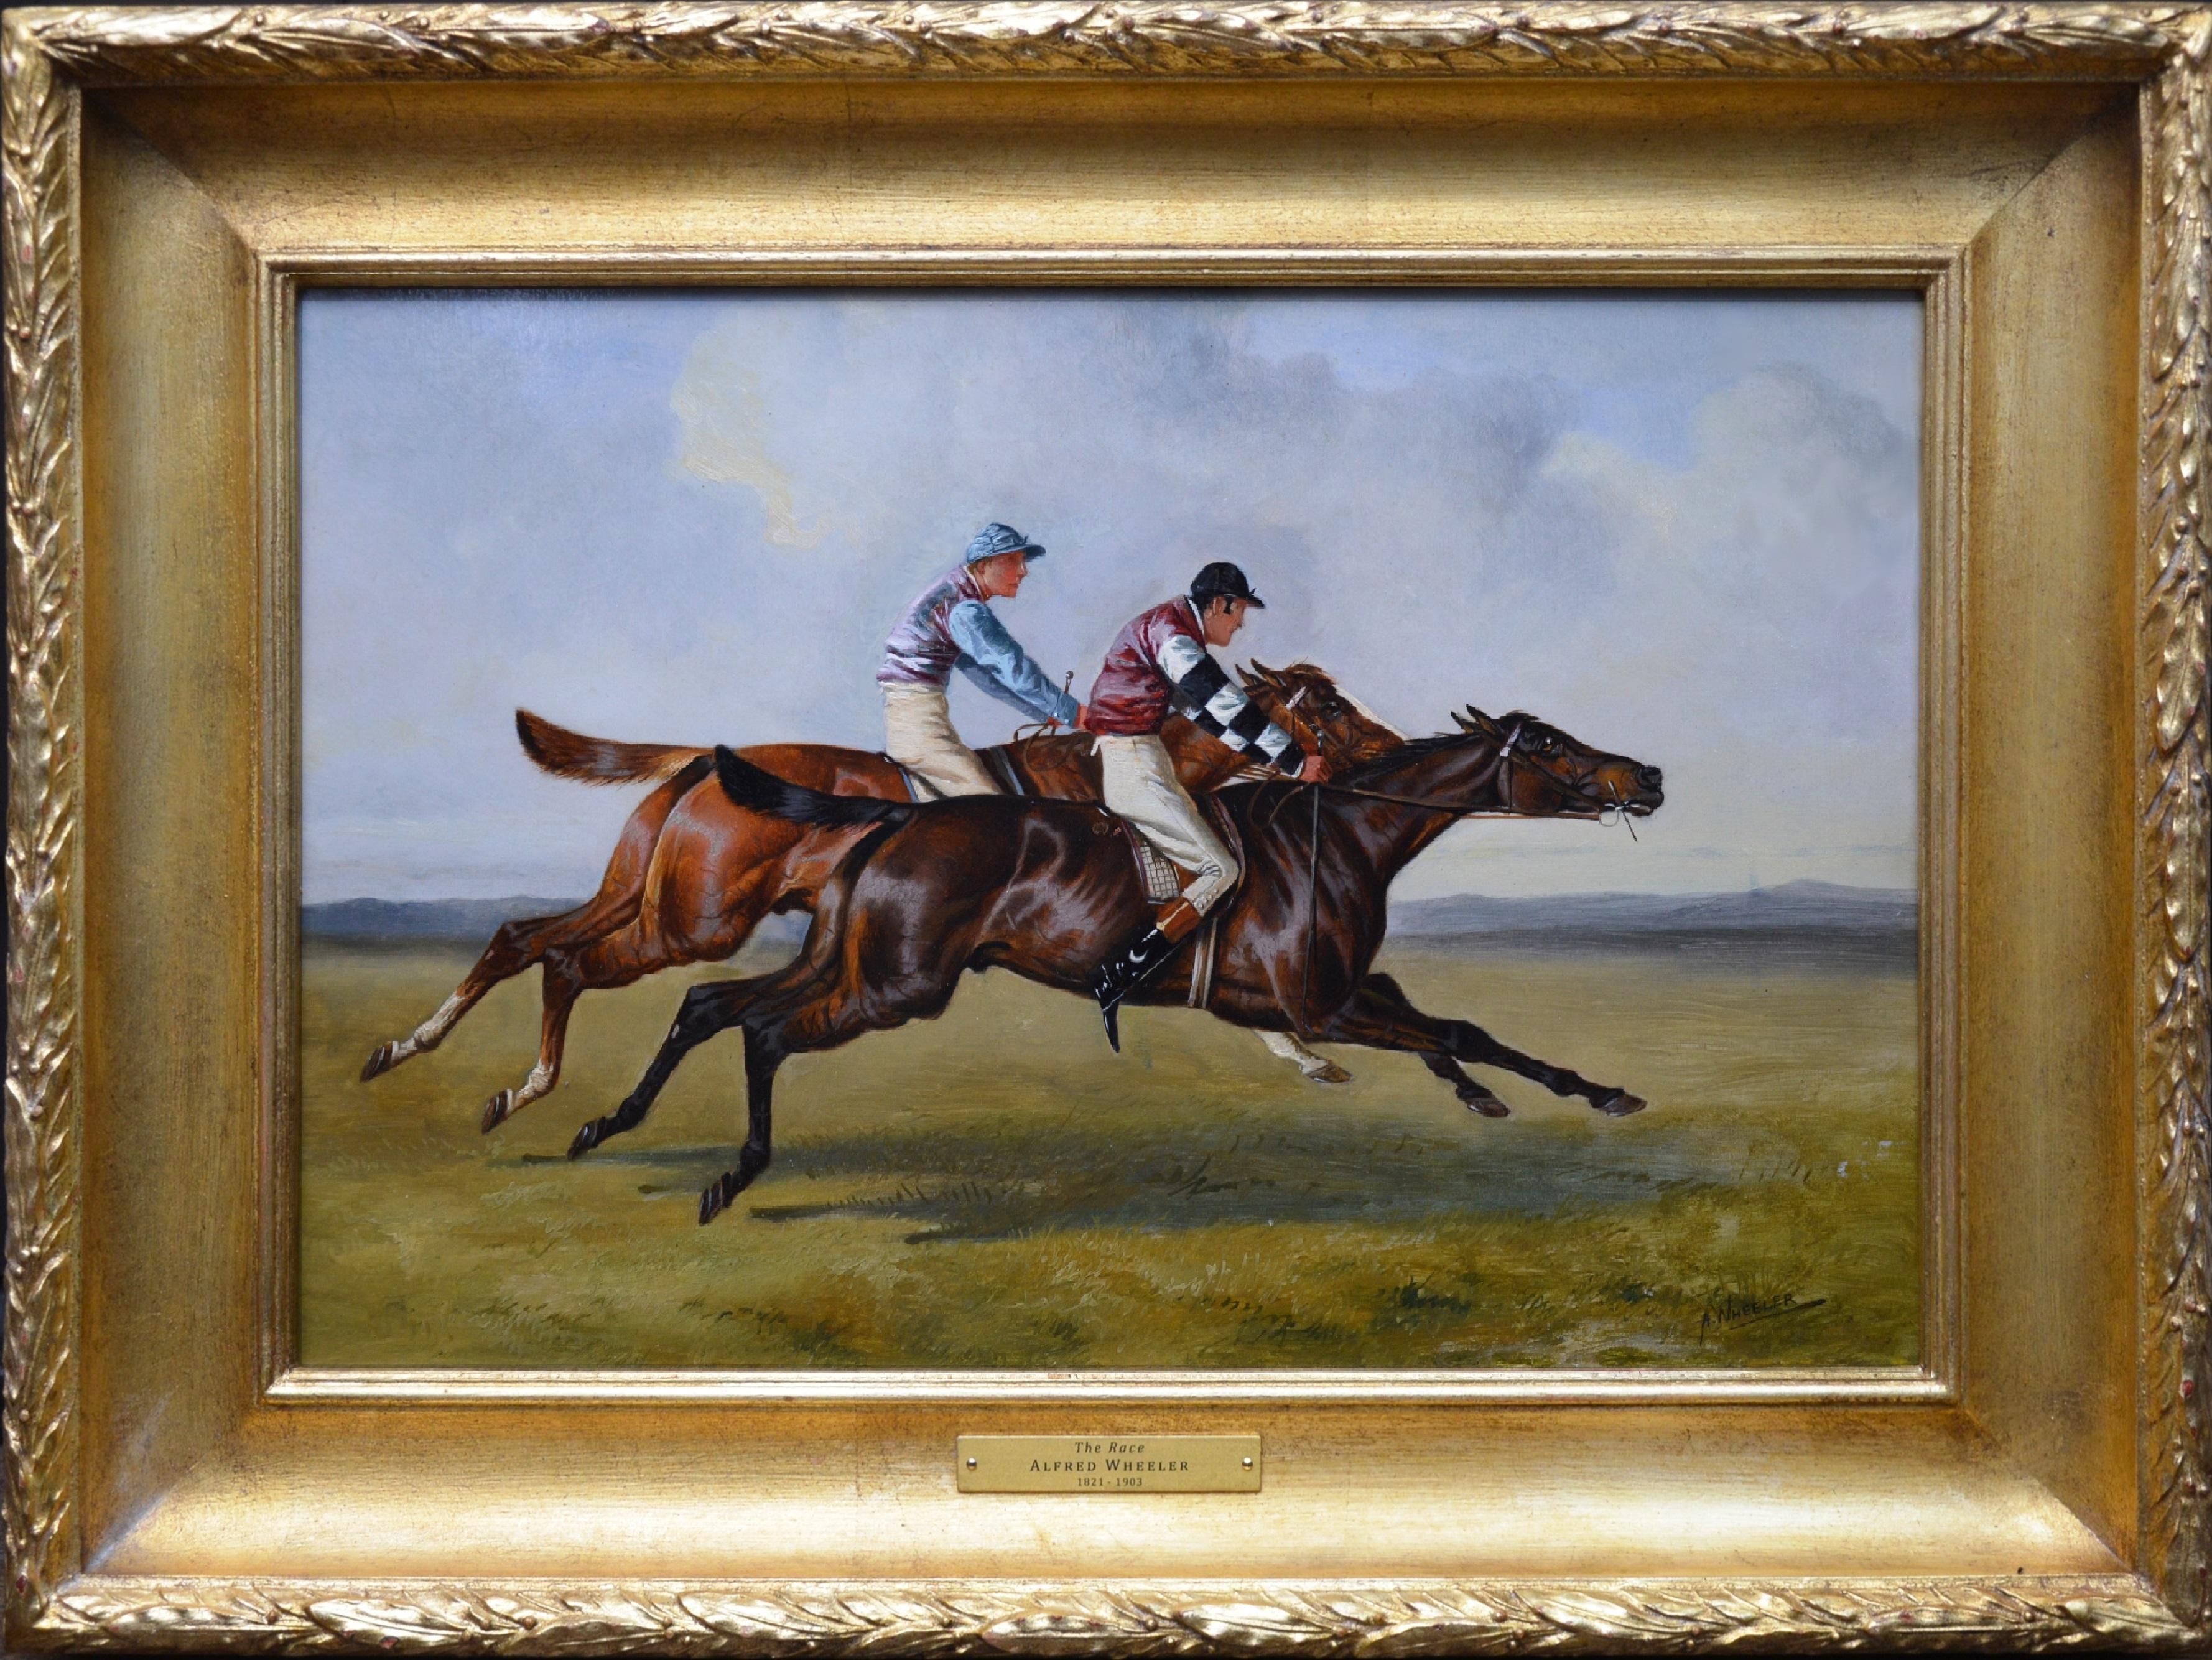 Alfred Wheeler Figurative Painting - The Race - 19th Century Oil Painting of Horse Racing. Lester Piggott Collection